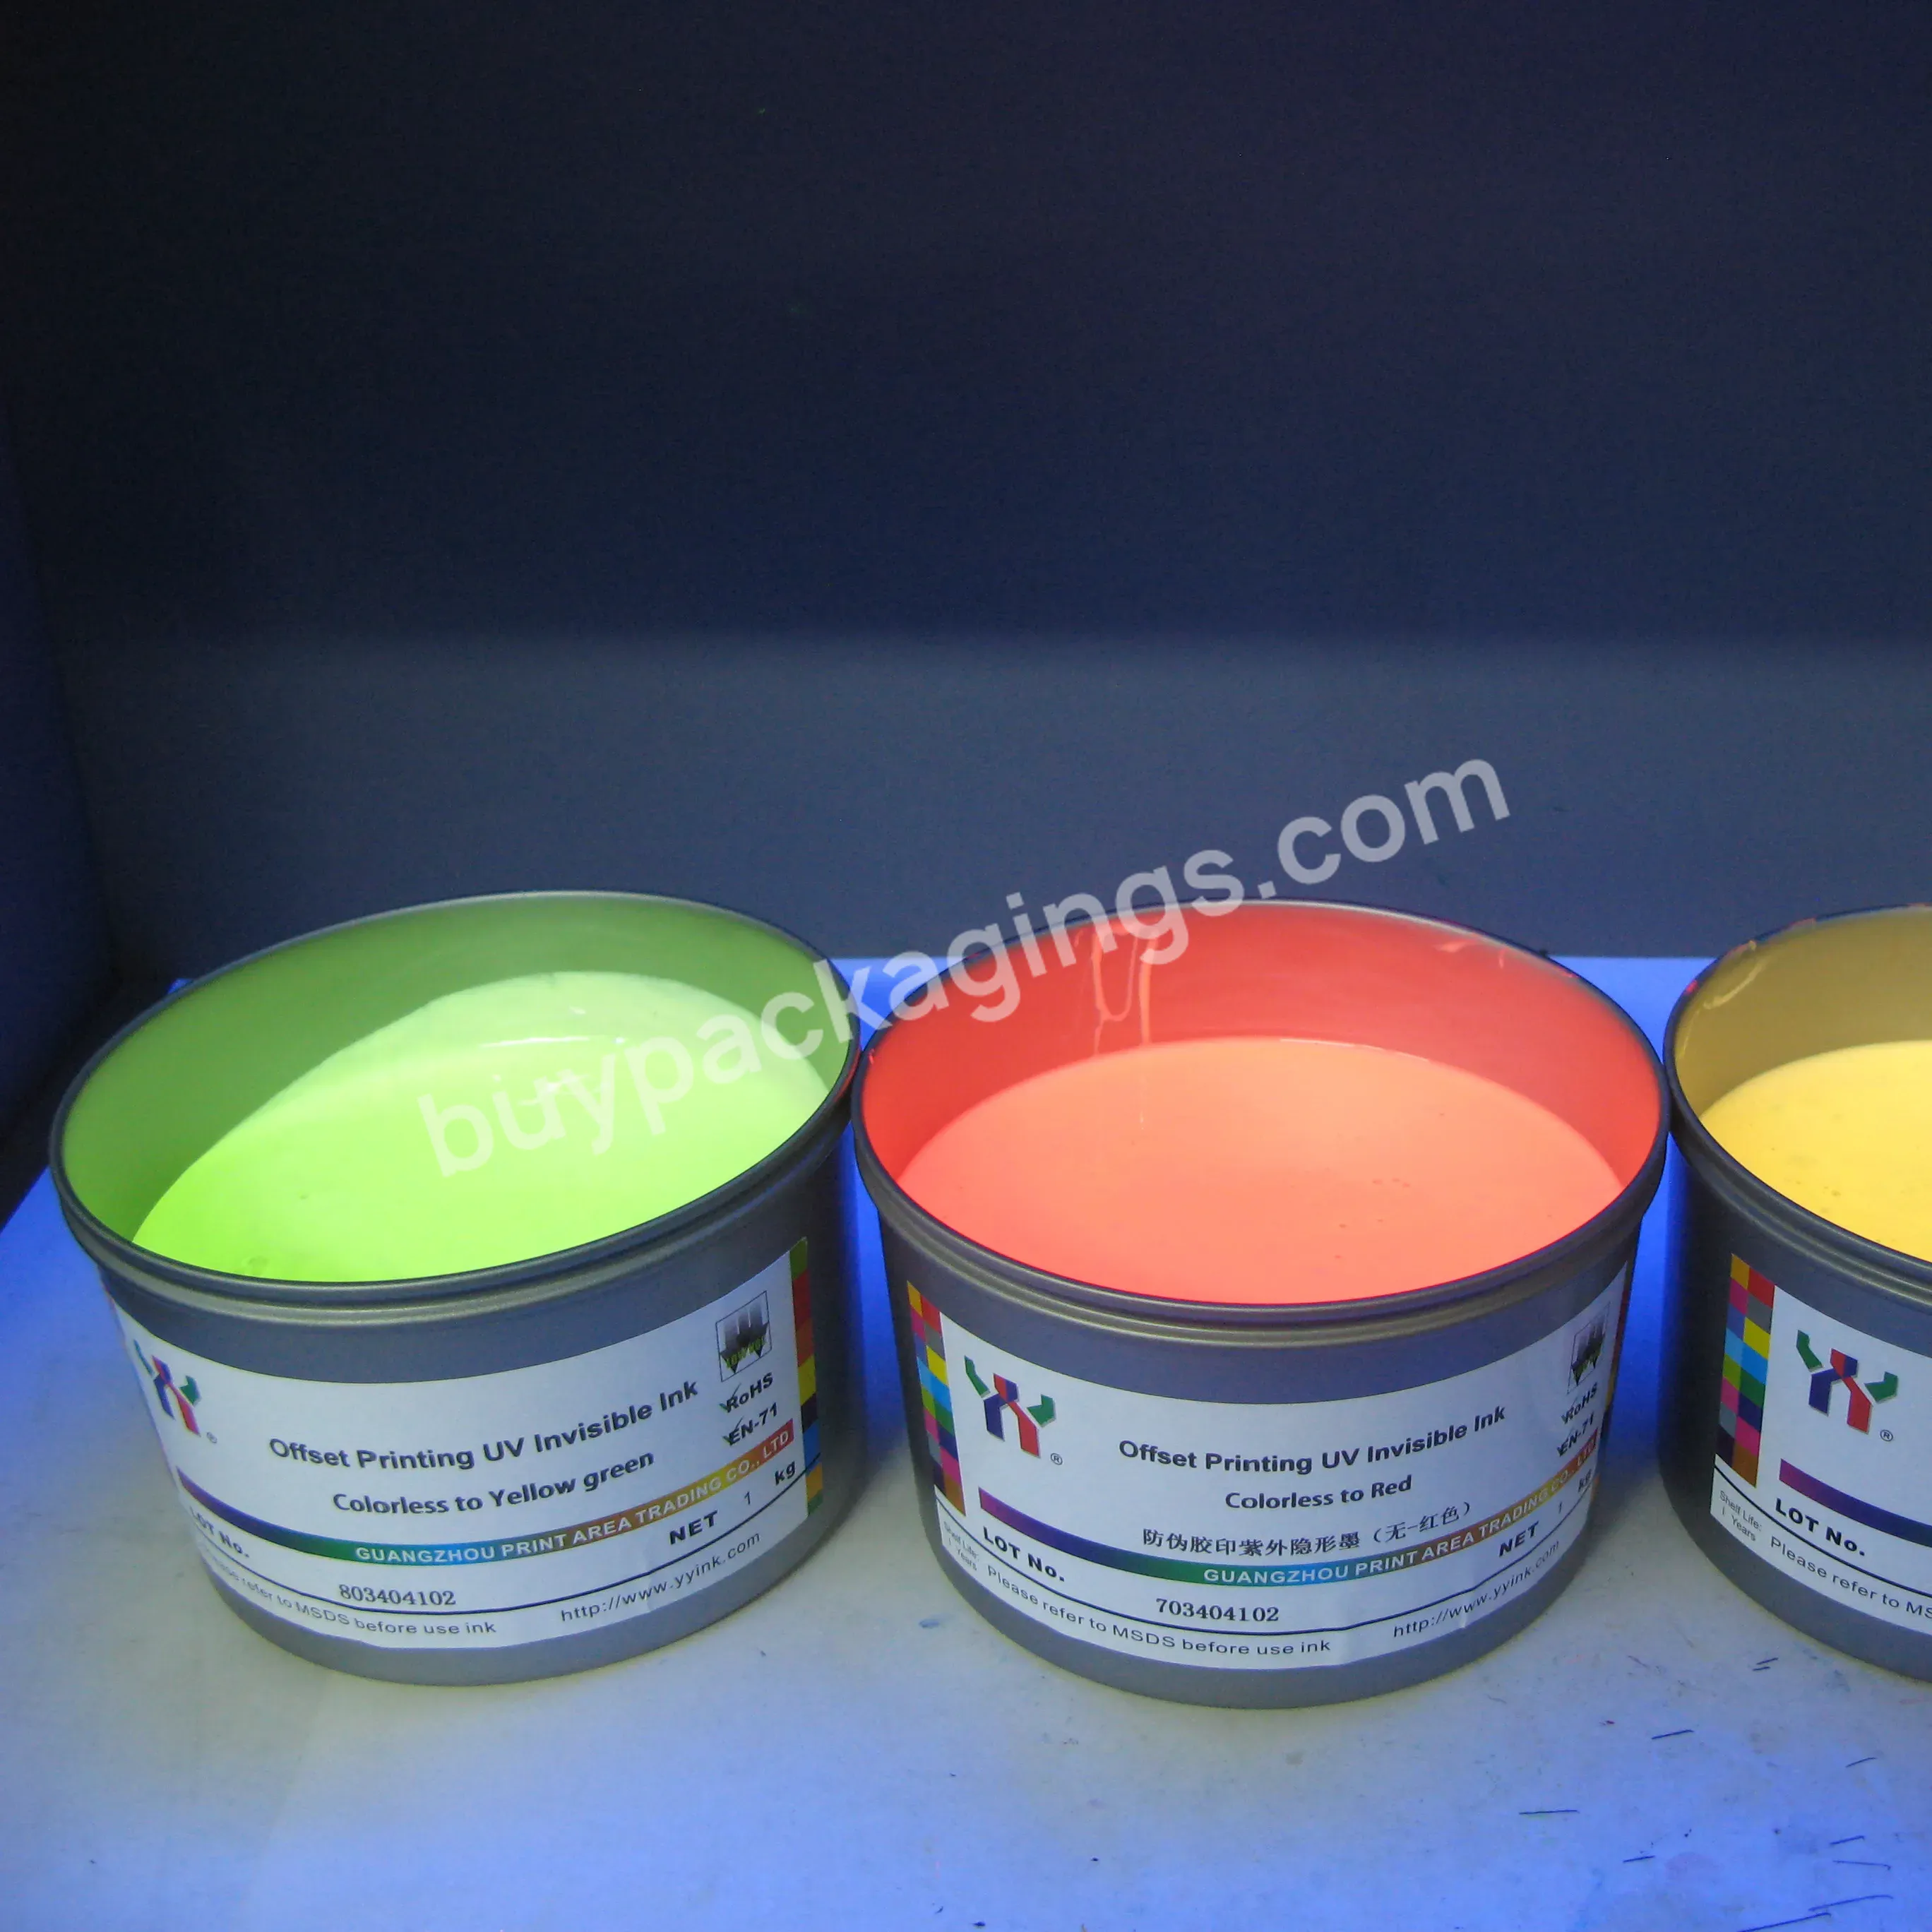 Uv Offset Printing Invisible Ink,Colorless To Purple,1kg/can,Uv Dry - Buy Invisible Ink,Security Ink,Infrared Invisible Ink.